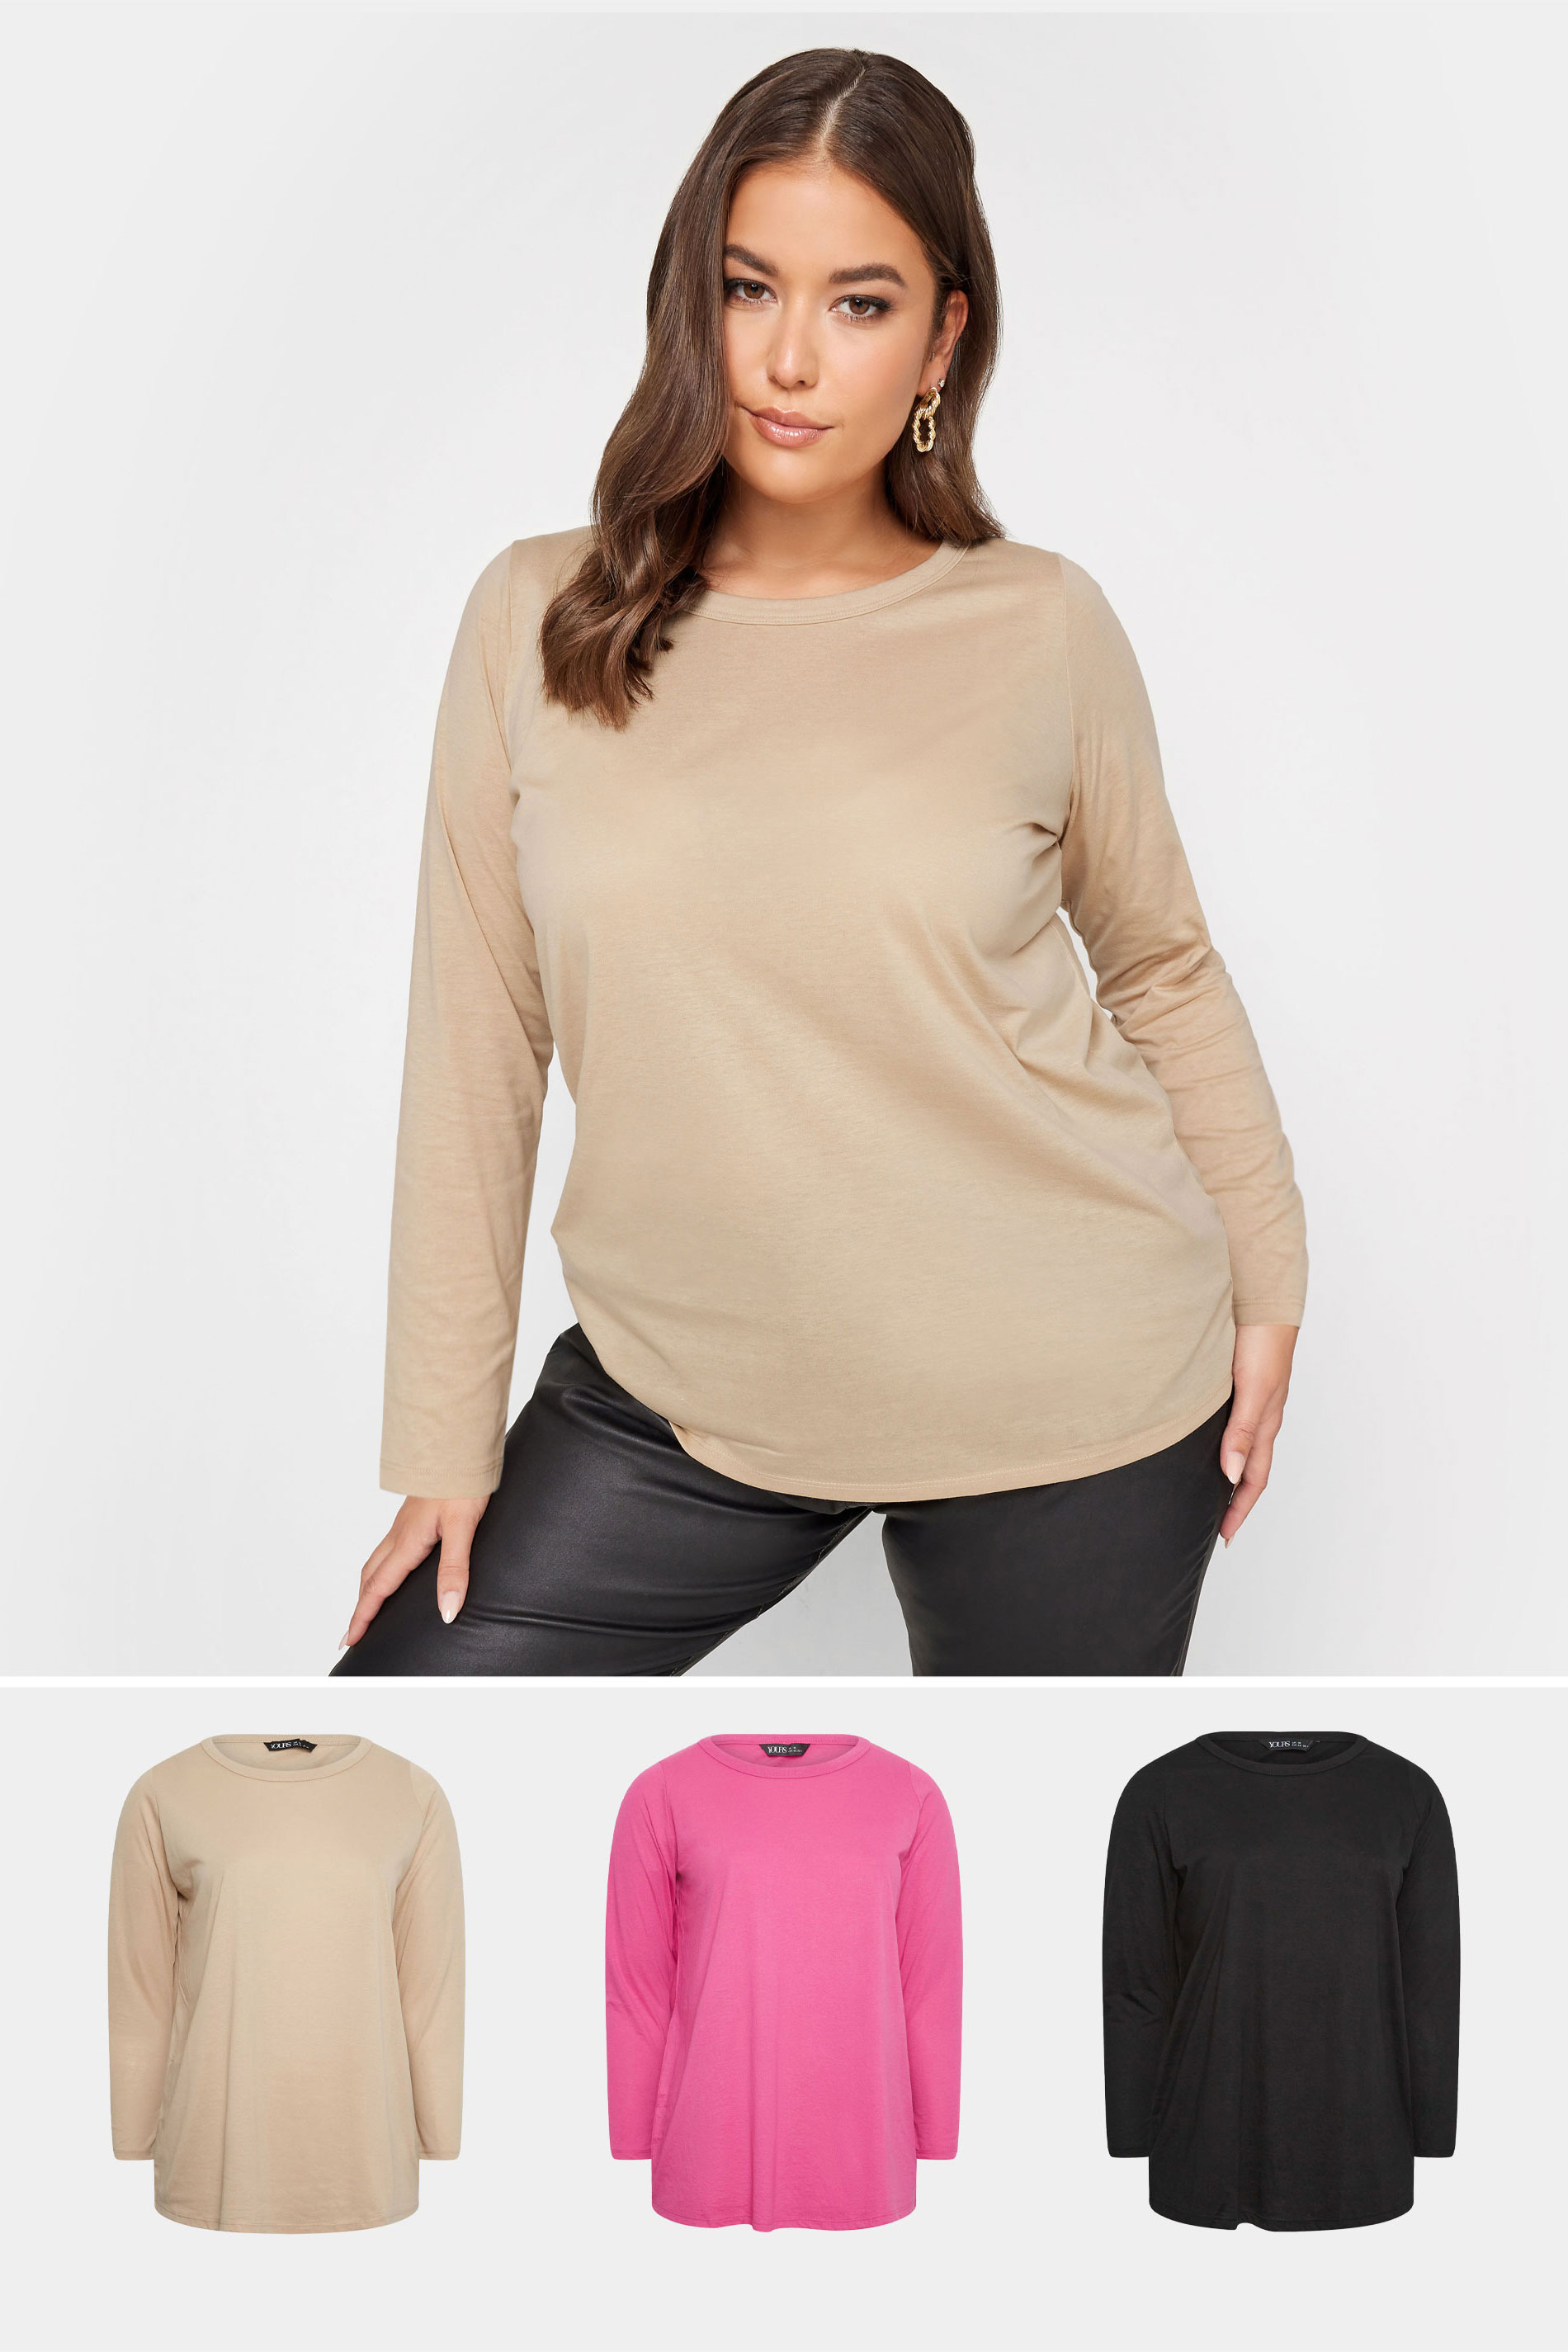 YOURS Curve Plus Size 3 PACK Beige Brown & Pink Long Sleeve Tops | Yours Clothing  1